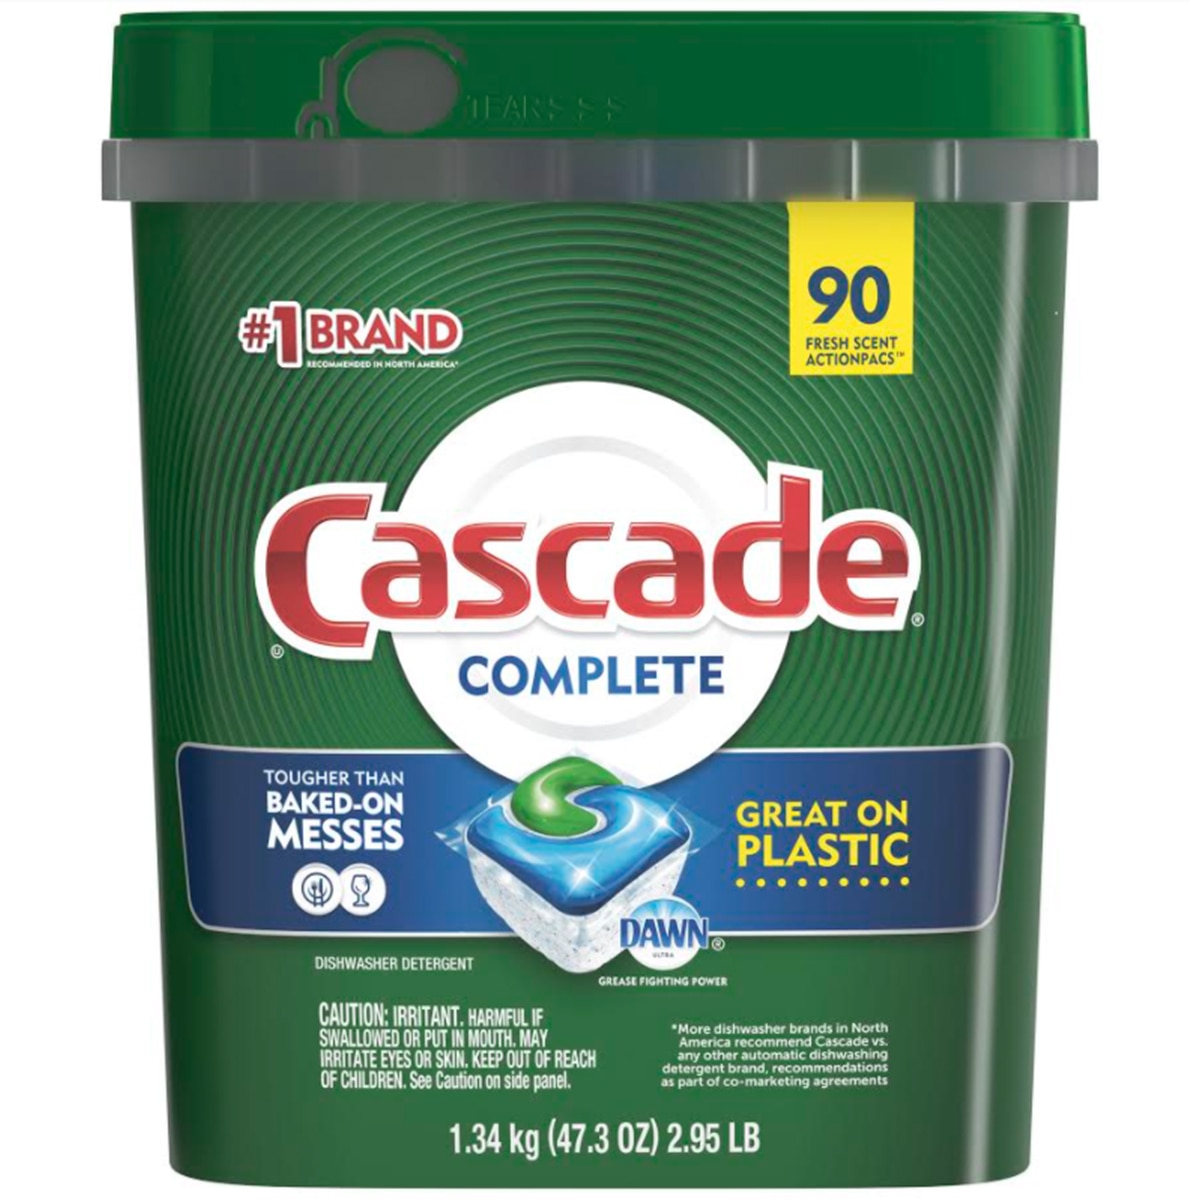 Cascade Complete With Dawn 90CT